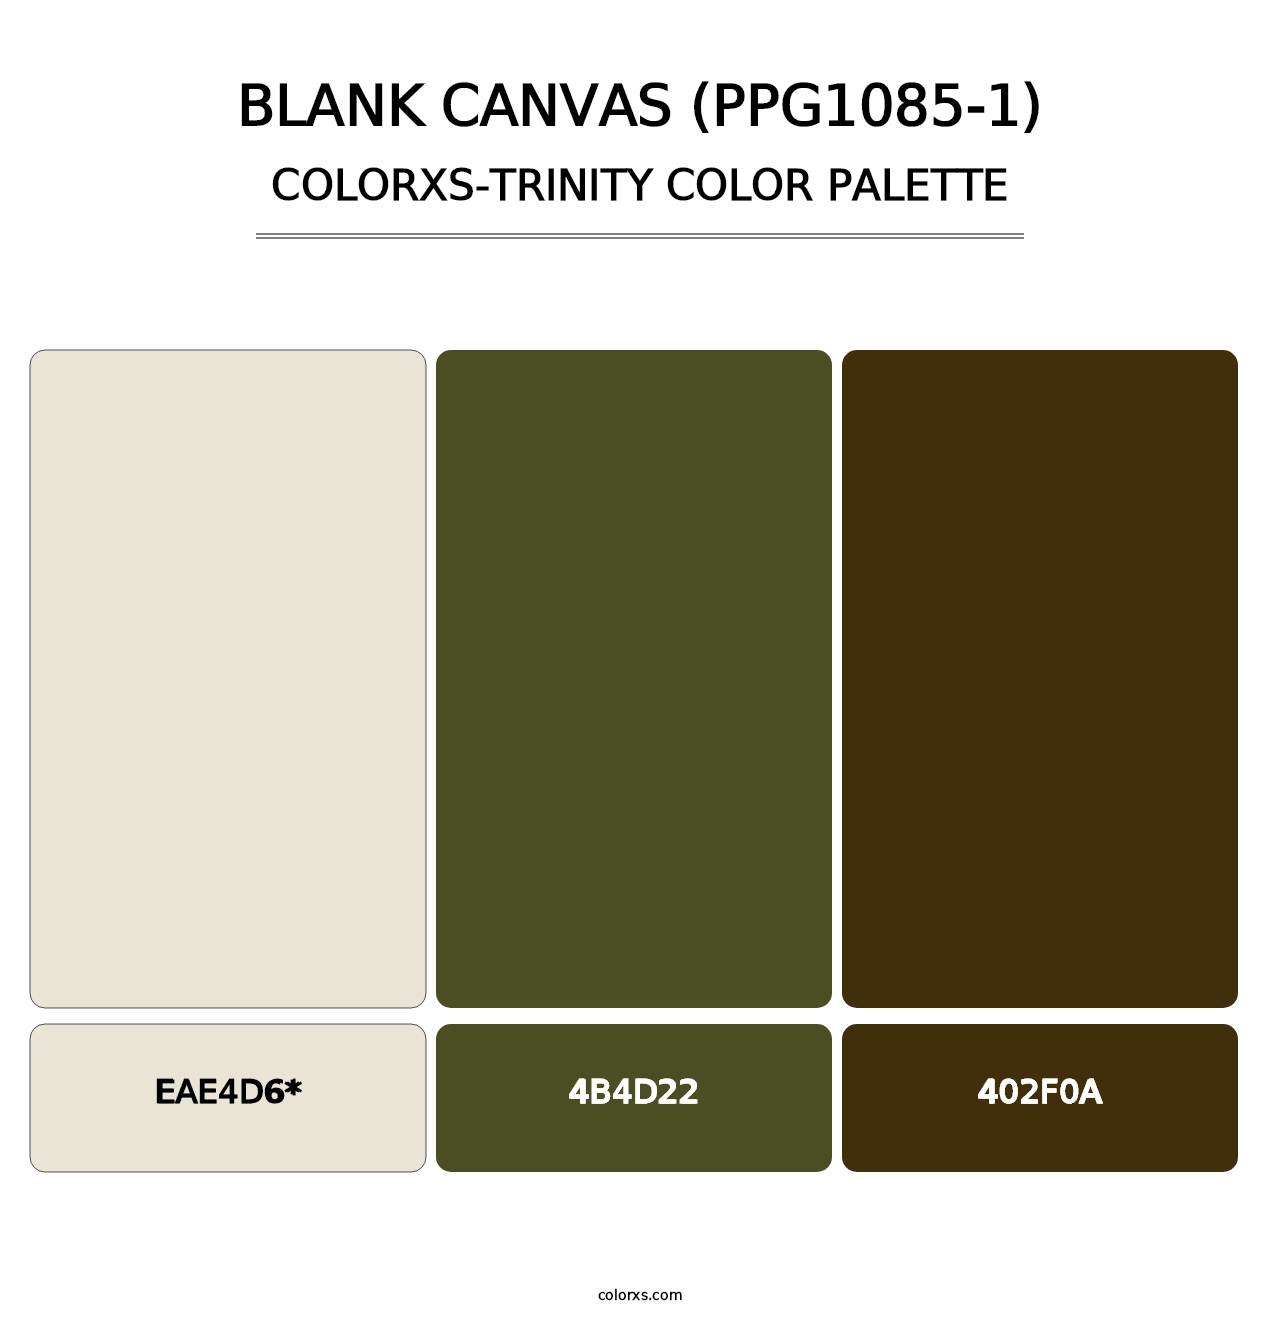 Blank Canvas (PPG1085-1) - Colorxs Trinity Palette